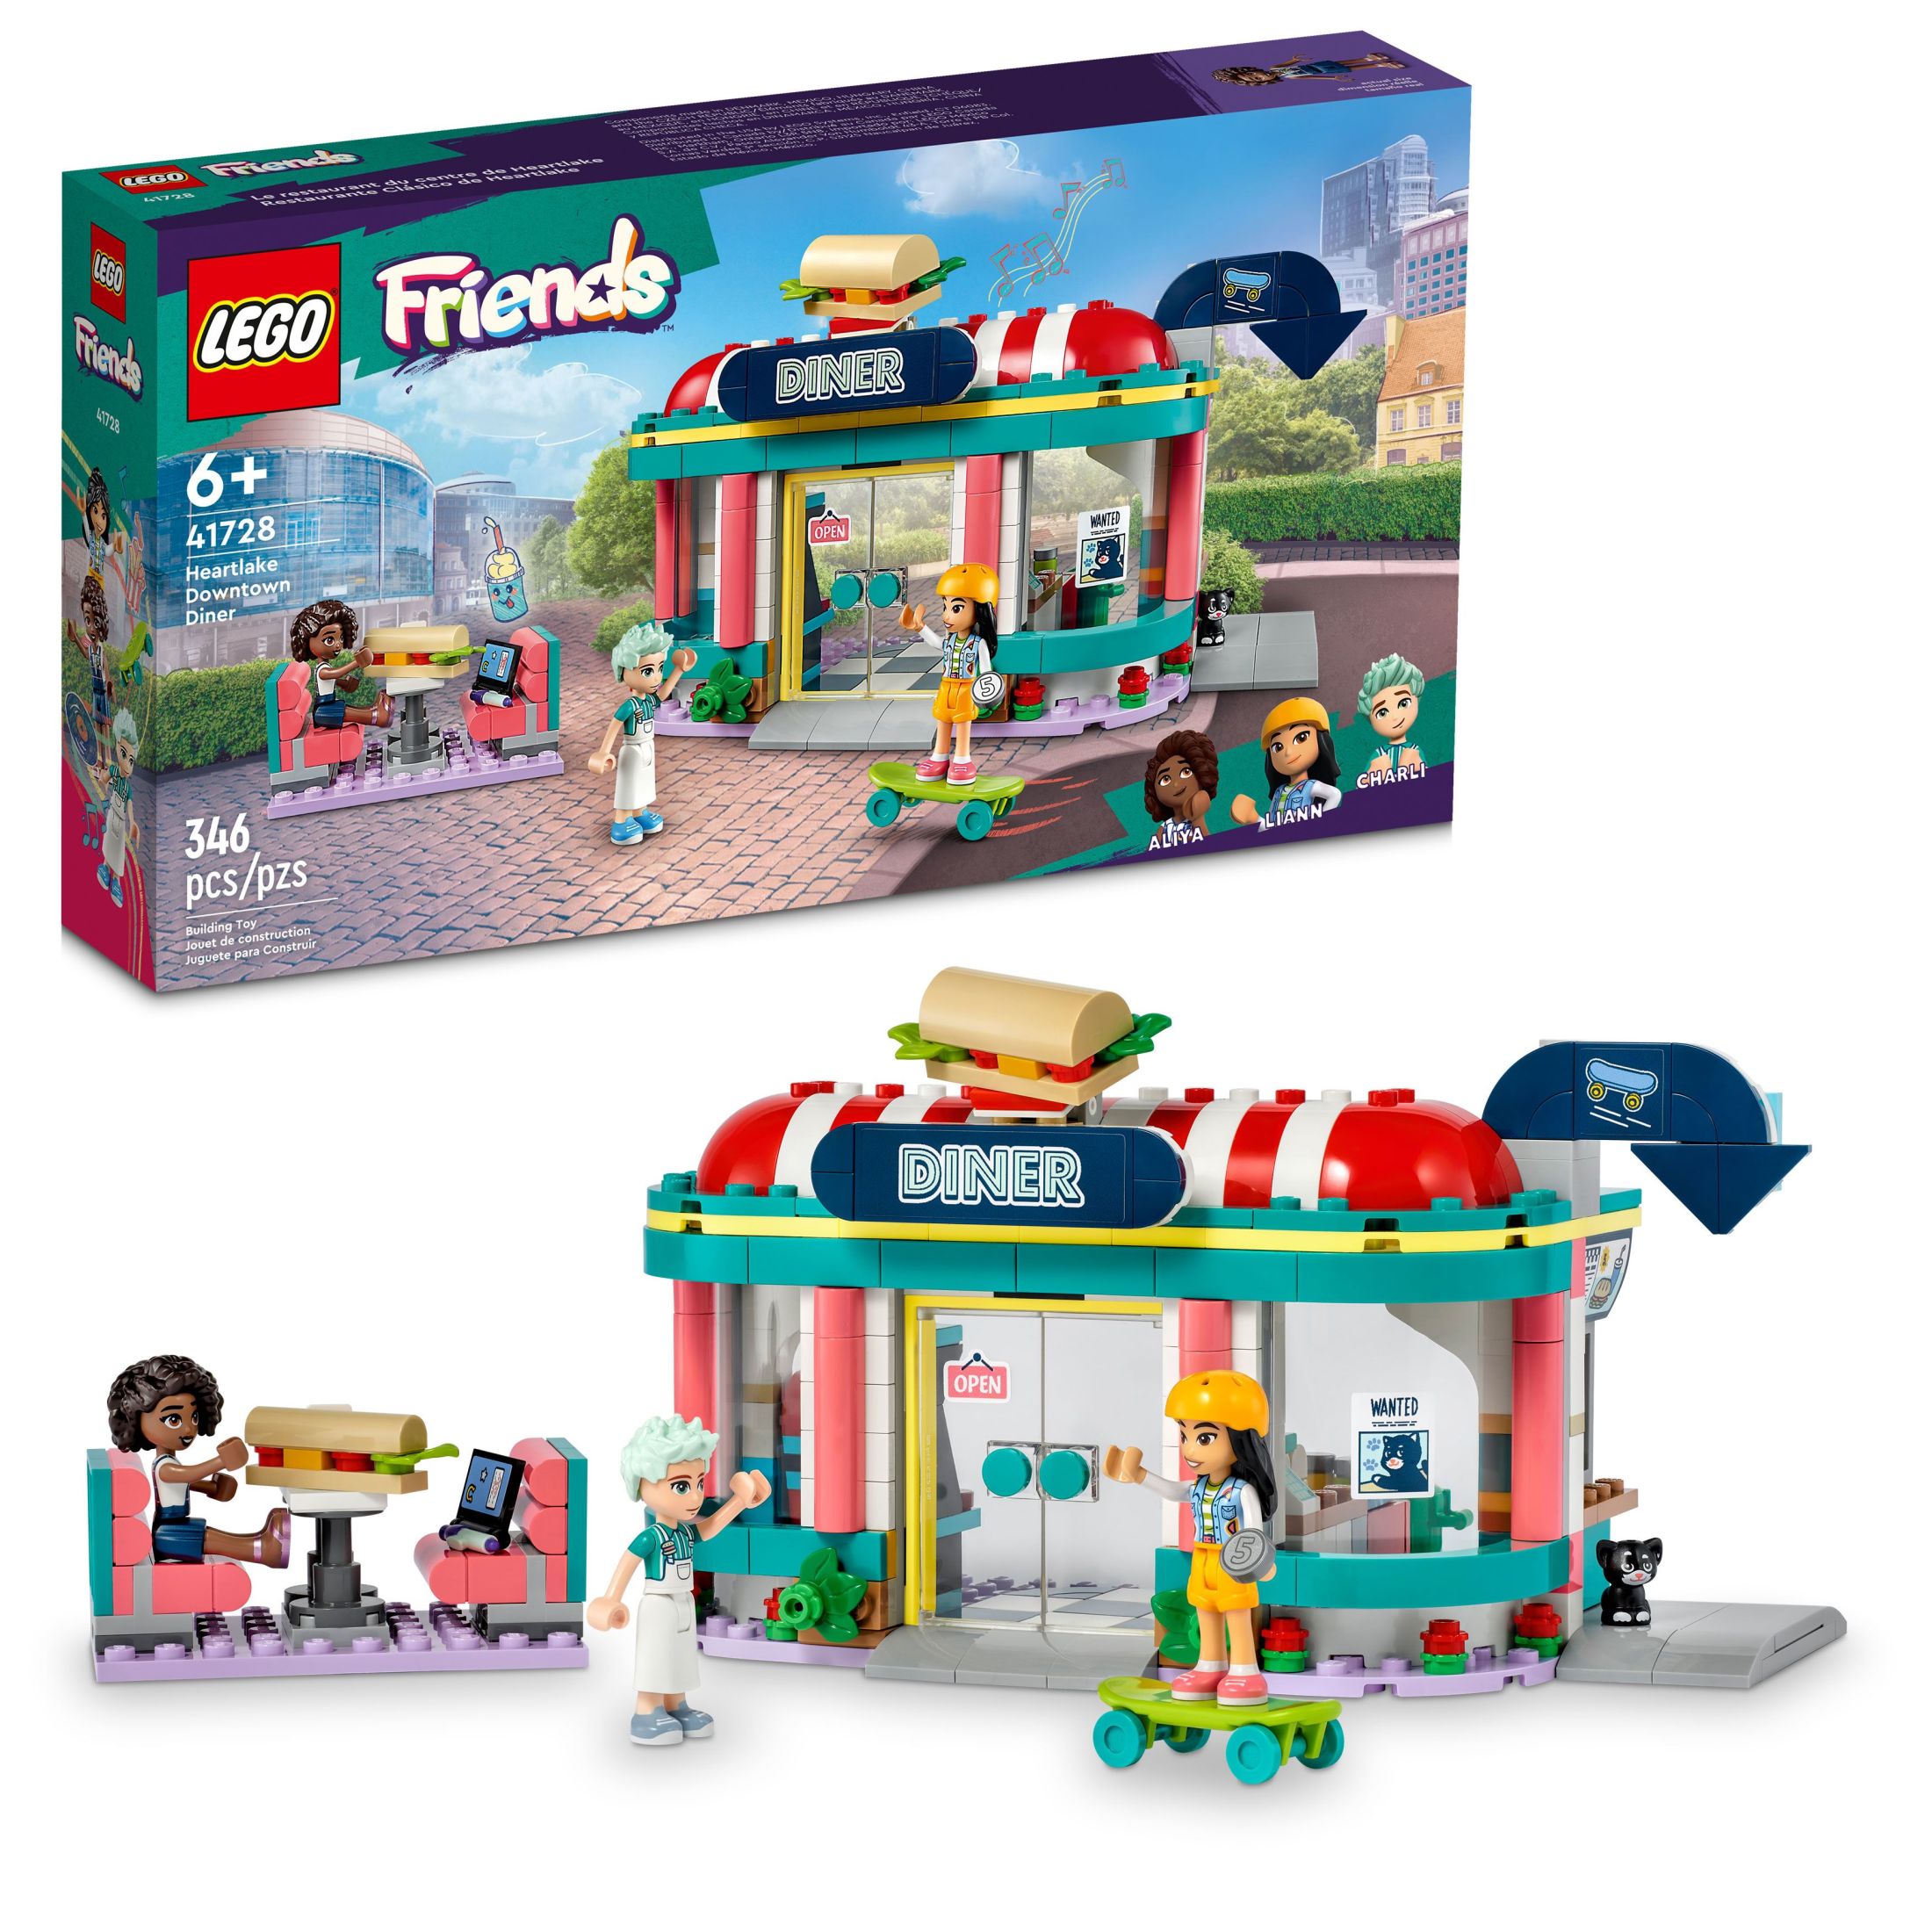 LEGO Friends Heartlake Downtown Diner 41728 Building Toy - Restaurant Pretend Playset with Food, Includes Mini-Dolls Liann, Aliya, and Charli, Birthday Gift Toy Set for Boys and Girls Ages 6+ - image 1 of 8